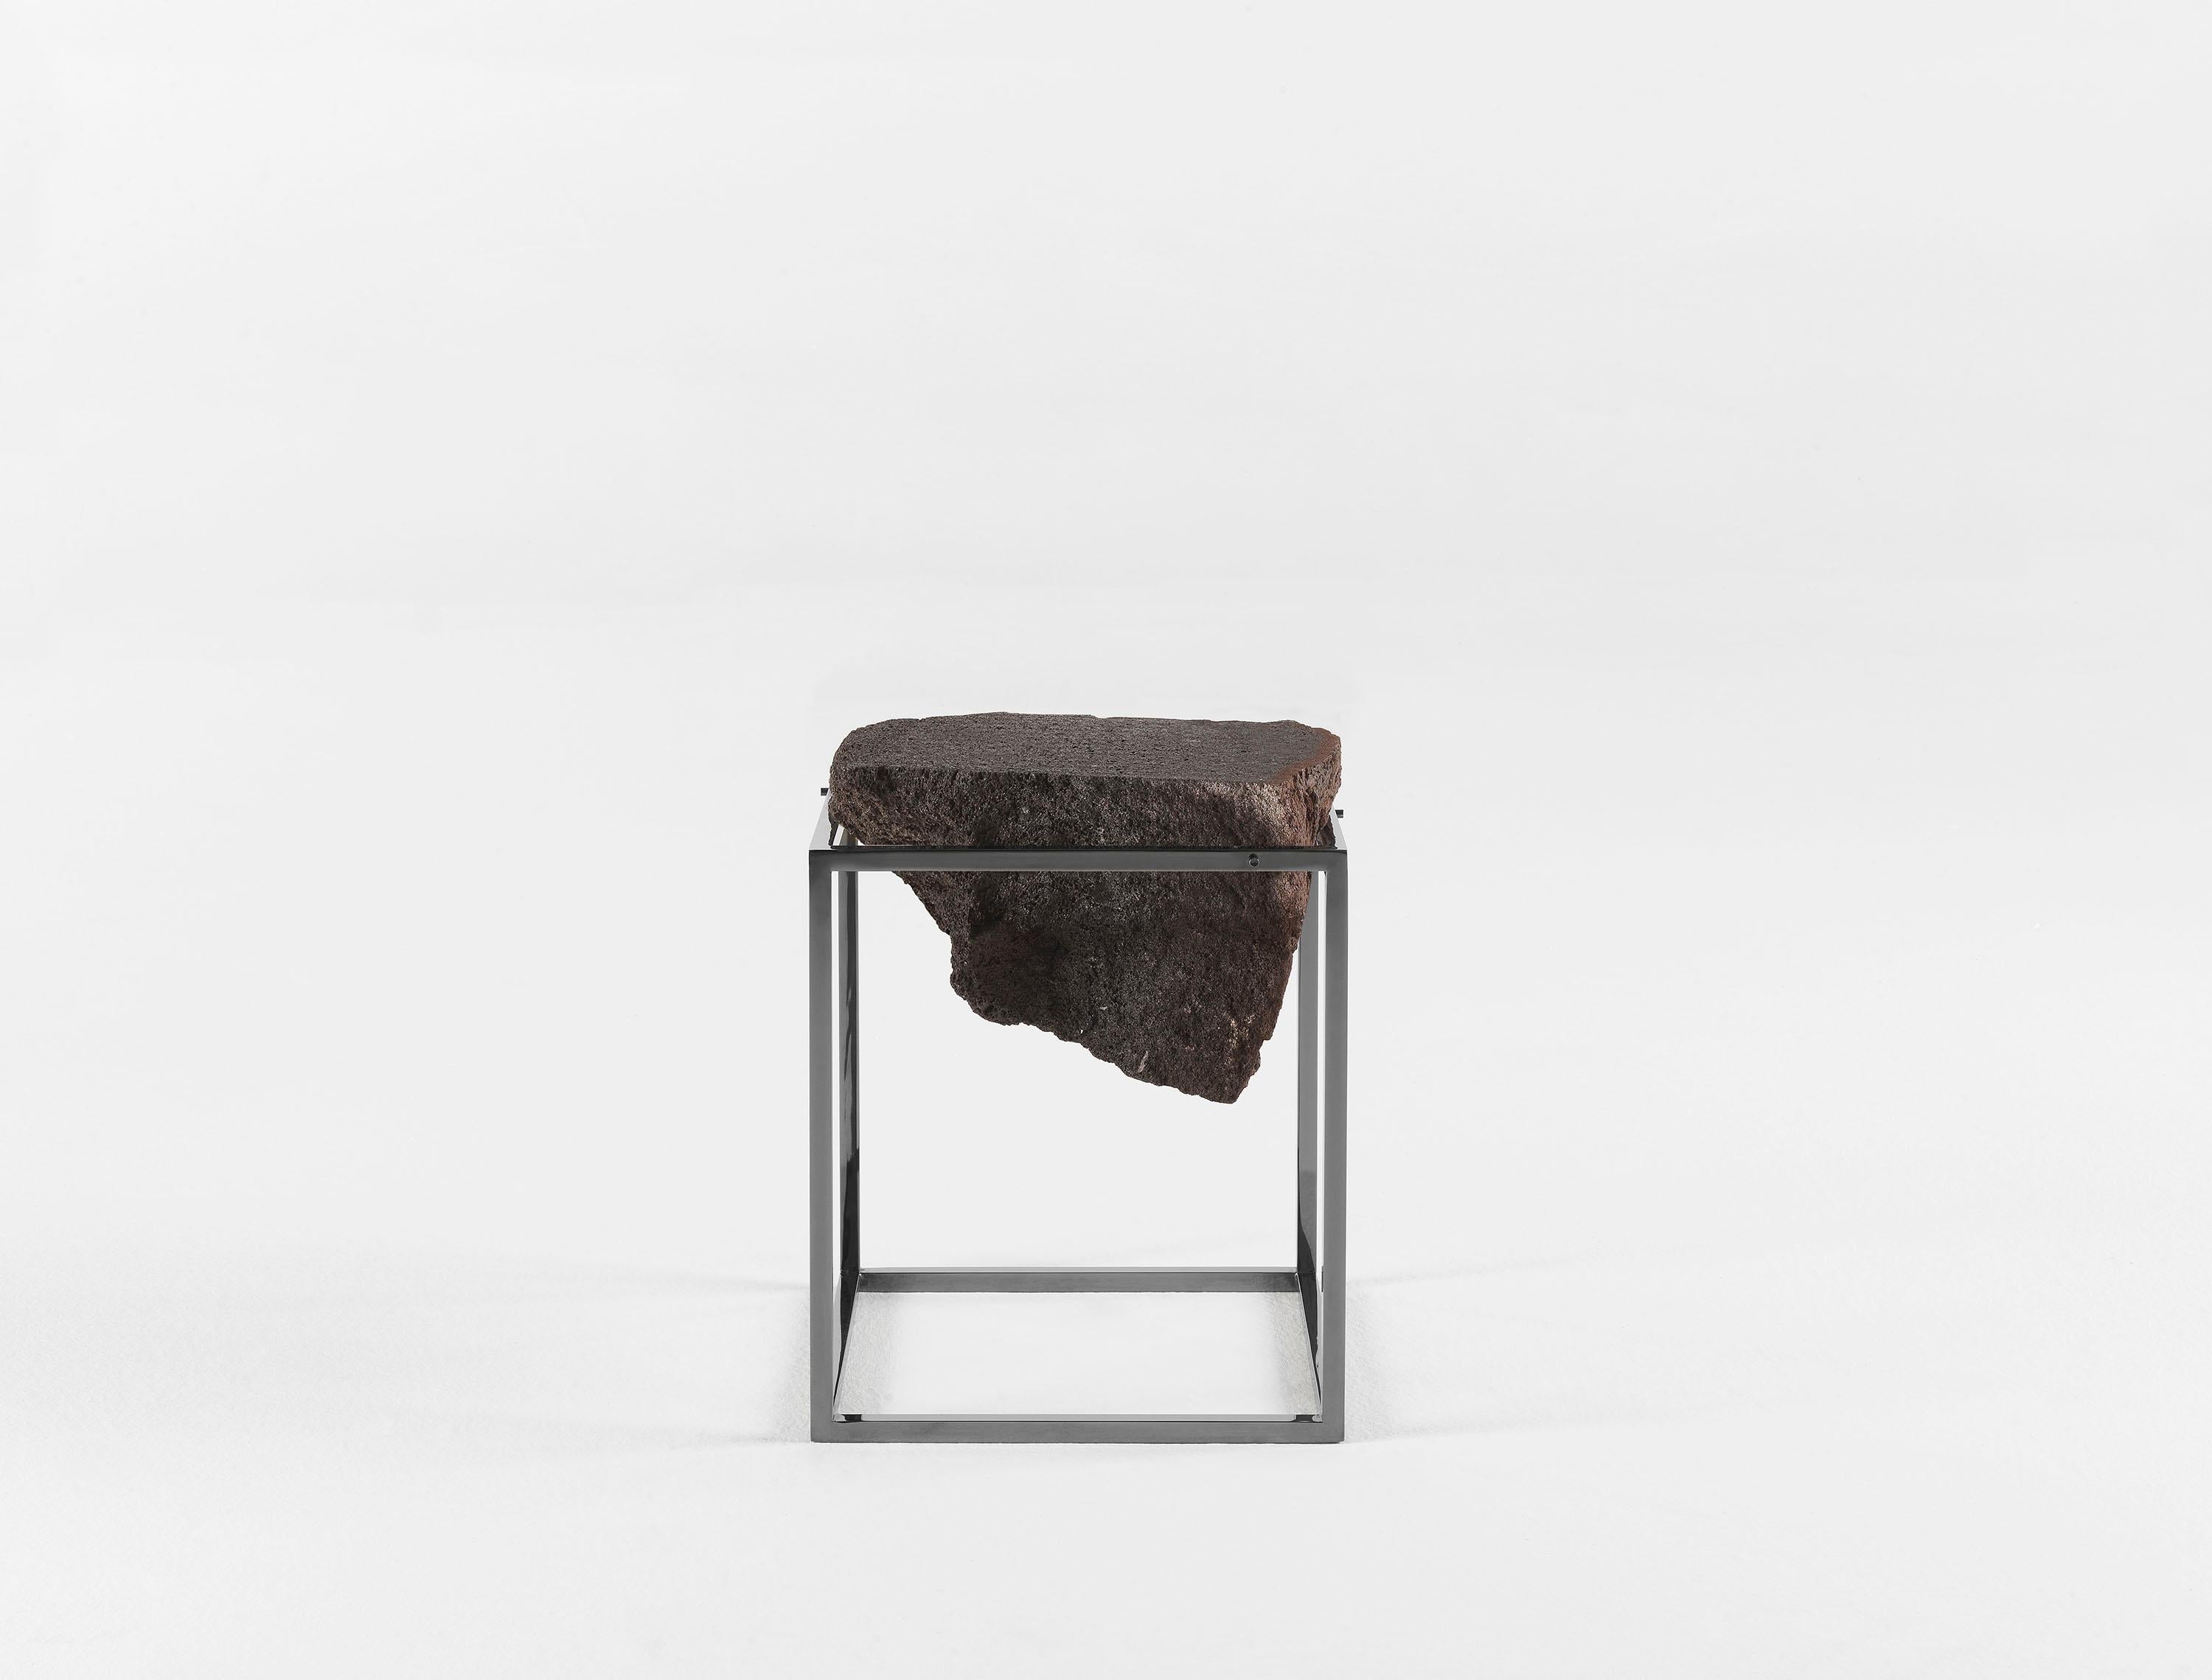 Black Antivol small side table by CTRLZAK
Materials: lava stone, metal structure in two finishes: polished black chrome and matte brass
Dimensions: 45 x 40 x 40 cm

A fragment of lava stone cut in half supported by a simple metal frame: nature